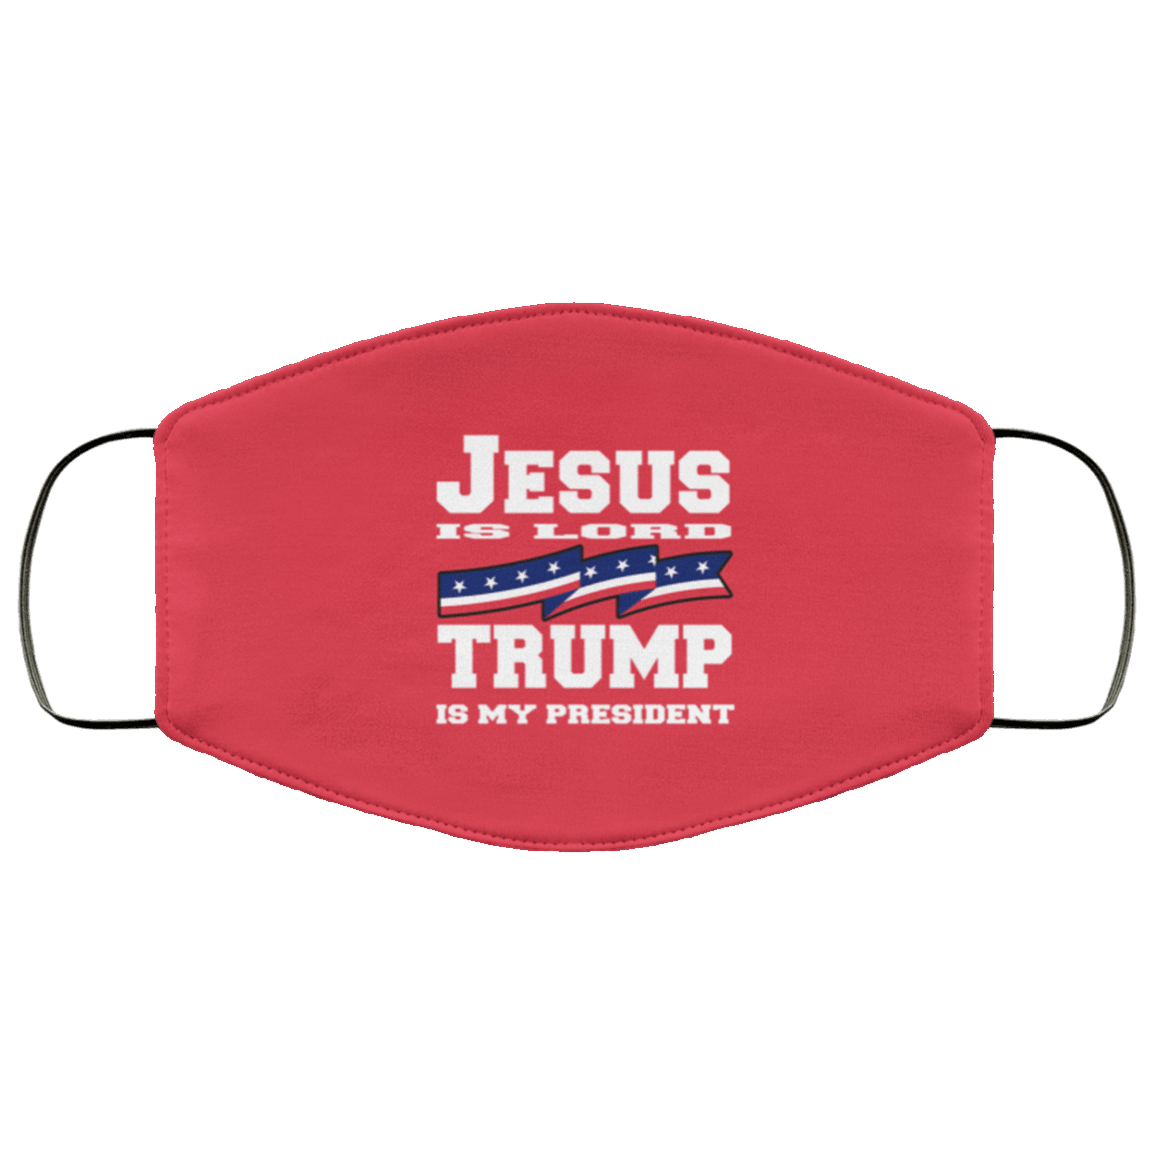 Designs by MyUtopia Shout Out:Jesus is Lord Trump Is President Adult Fabric Face Mask with Elastic Ear Loops,Fabric Face Mask / White / Adult,Fabric Face Mask